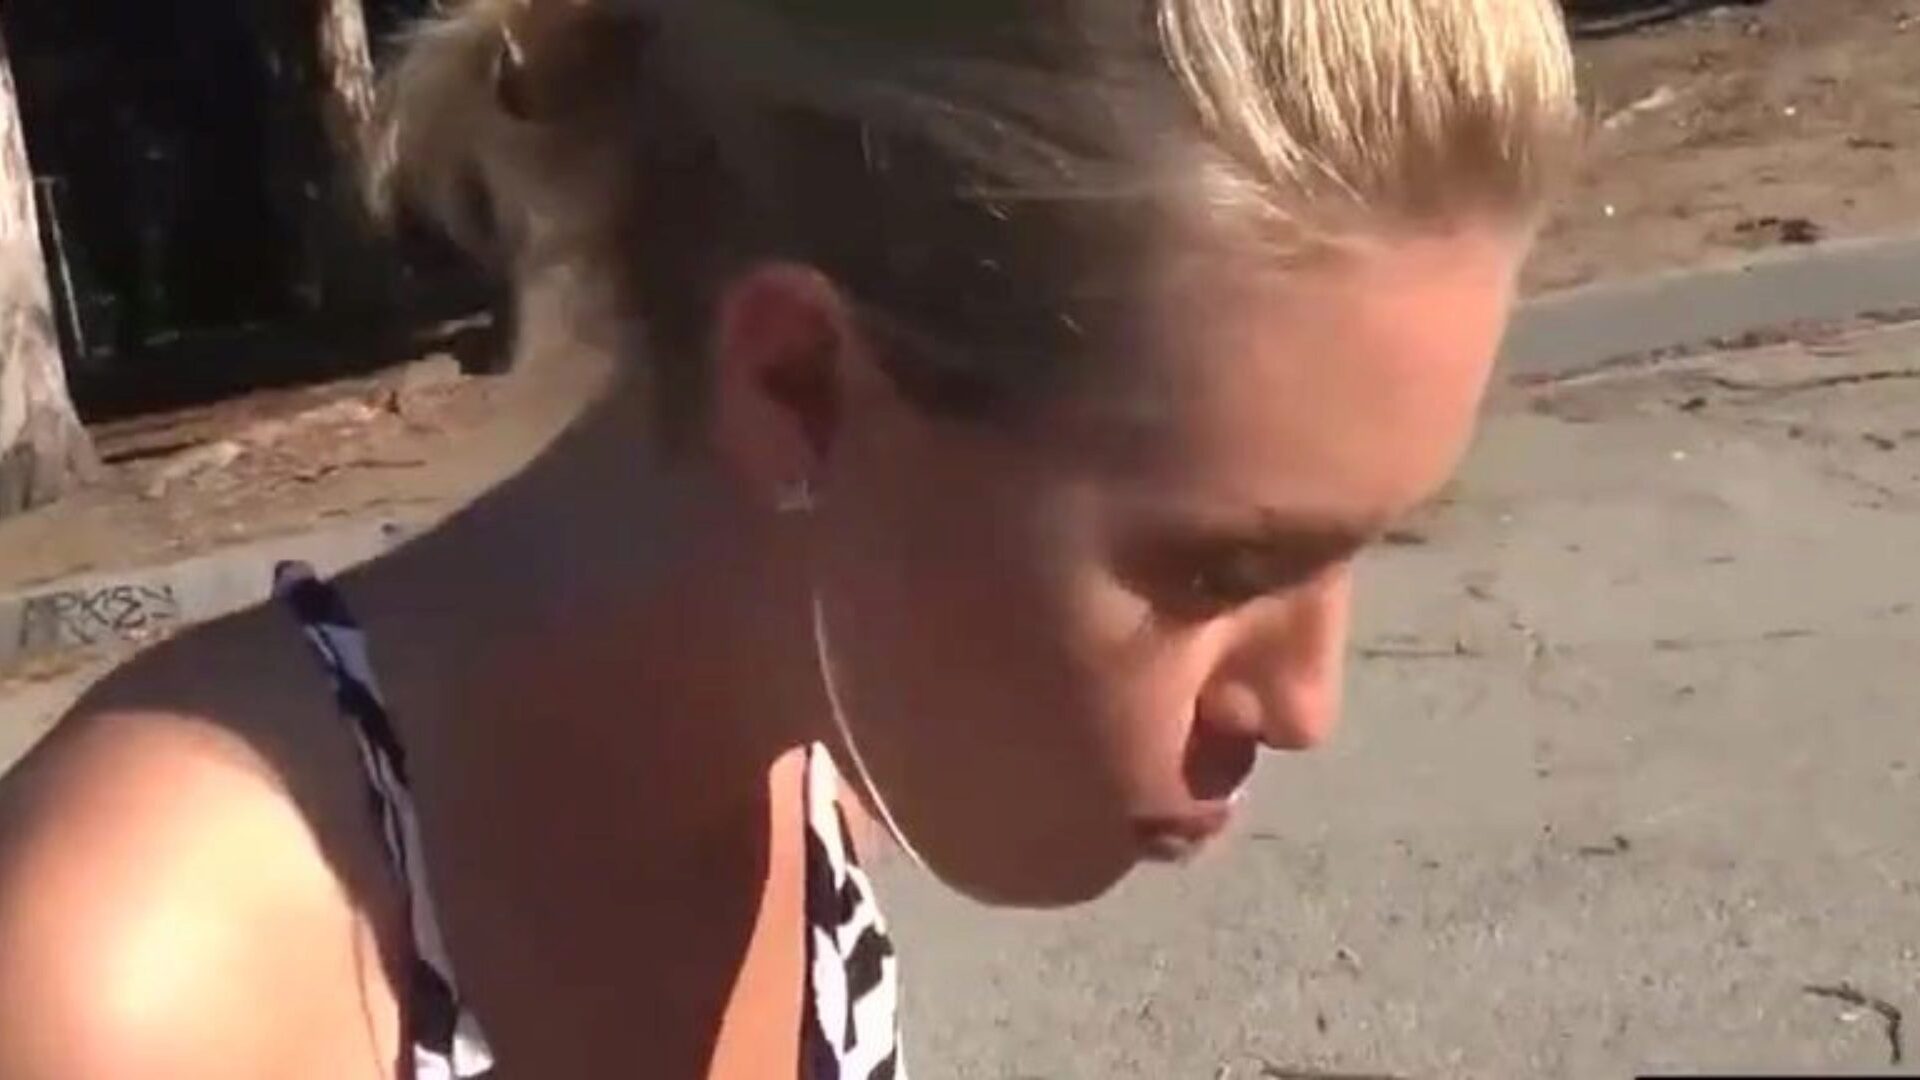 Ultra hot blond honey screwed outdoor in public Ultra hot golden-haired hottie Nicole Aniston cant live without to have orgy in public! In this scene that chick receives banged outdoor next to educate raleway and this hottie receives her cookie filled with cum